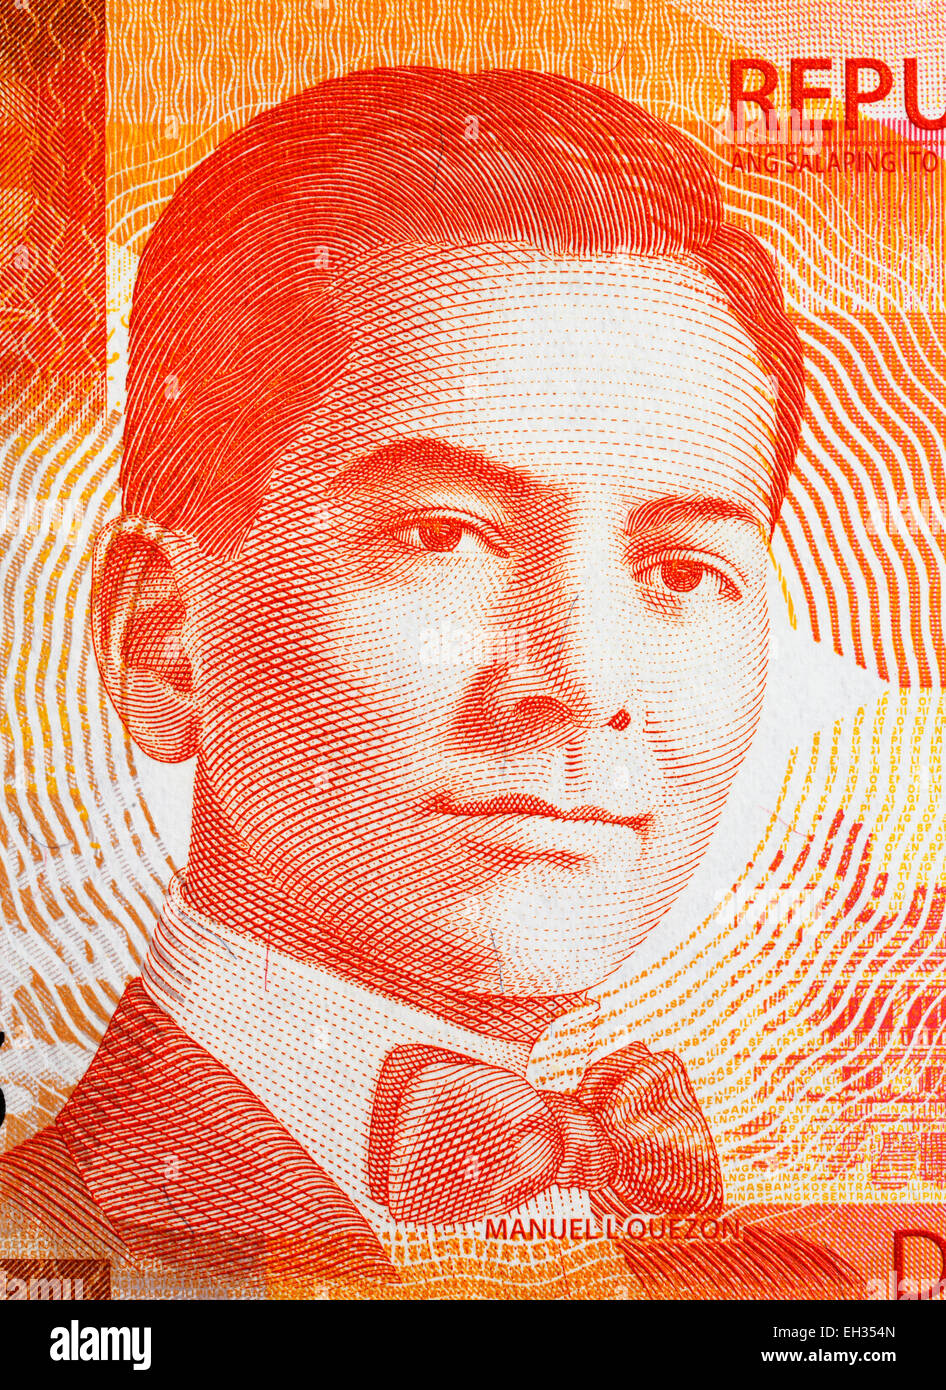 Manuel L. Quezon  from 20 piso banknote, Philippines, 2010 Stock Photo